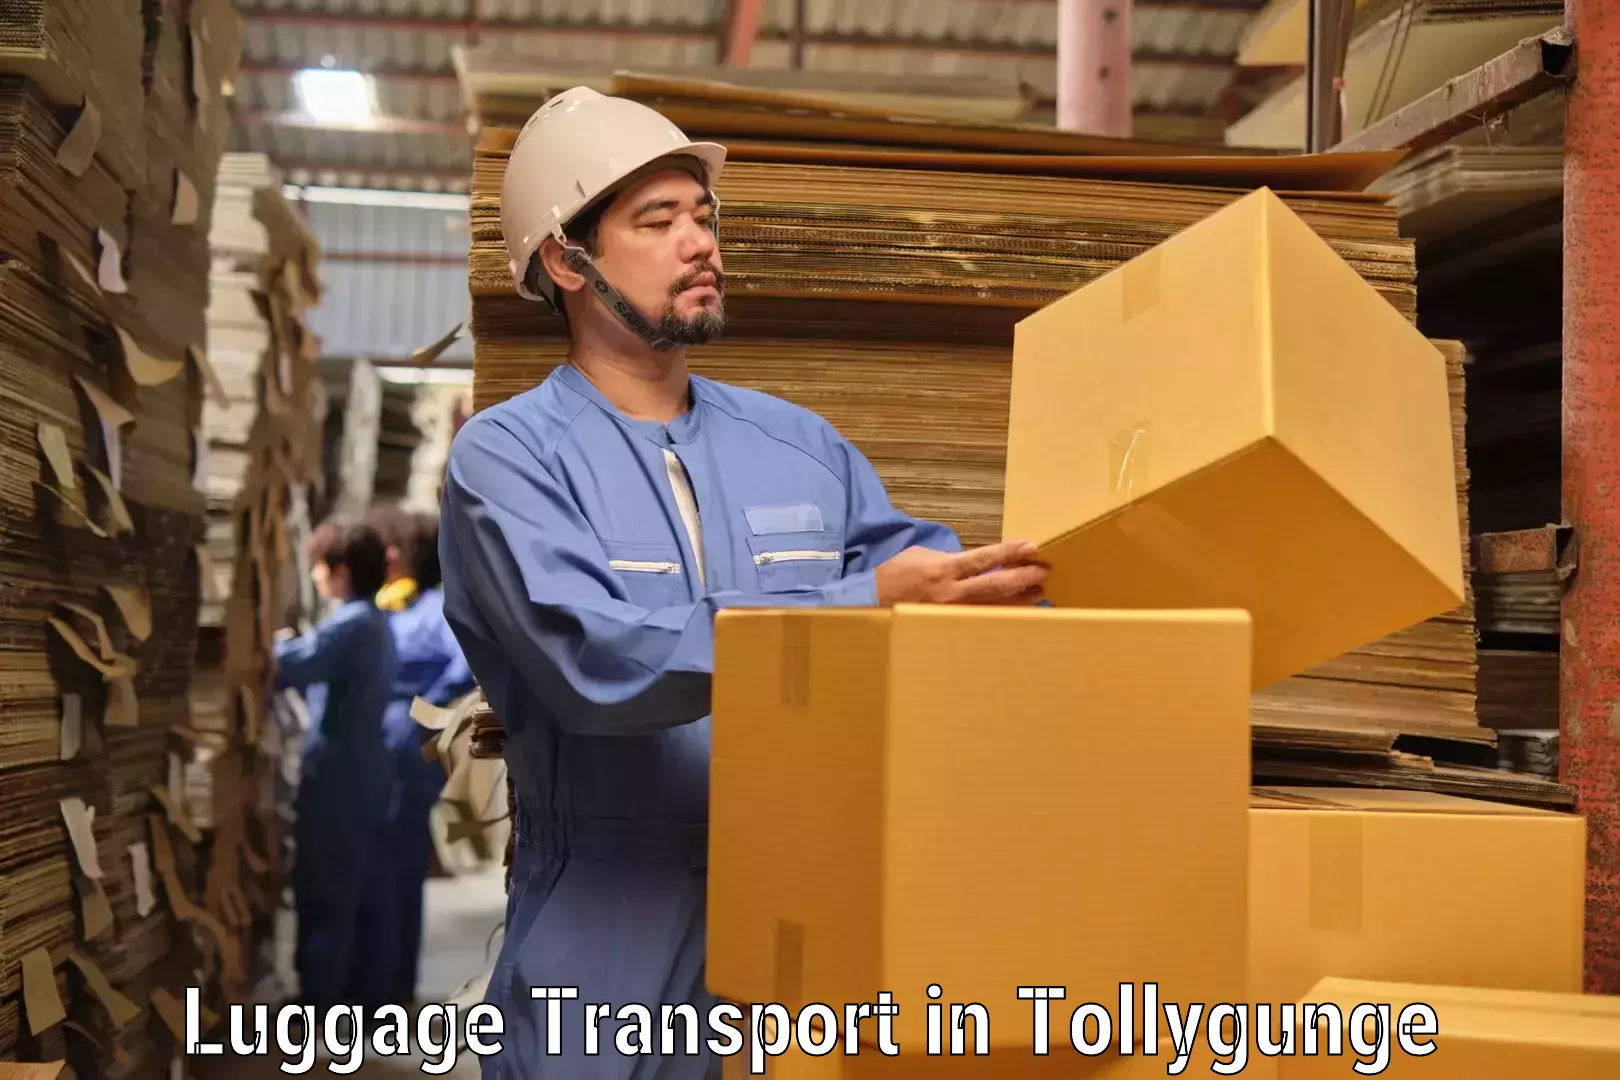 Luggage shipping trends in Tollygunge